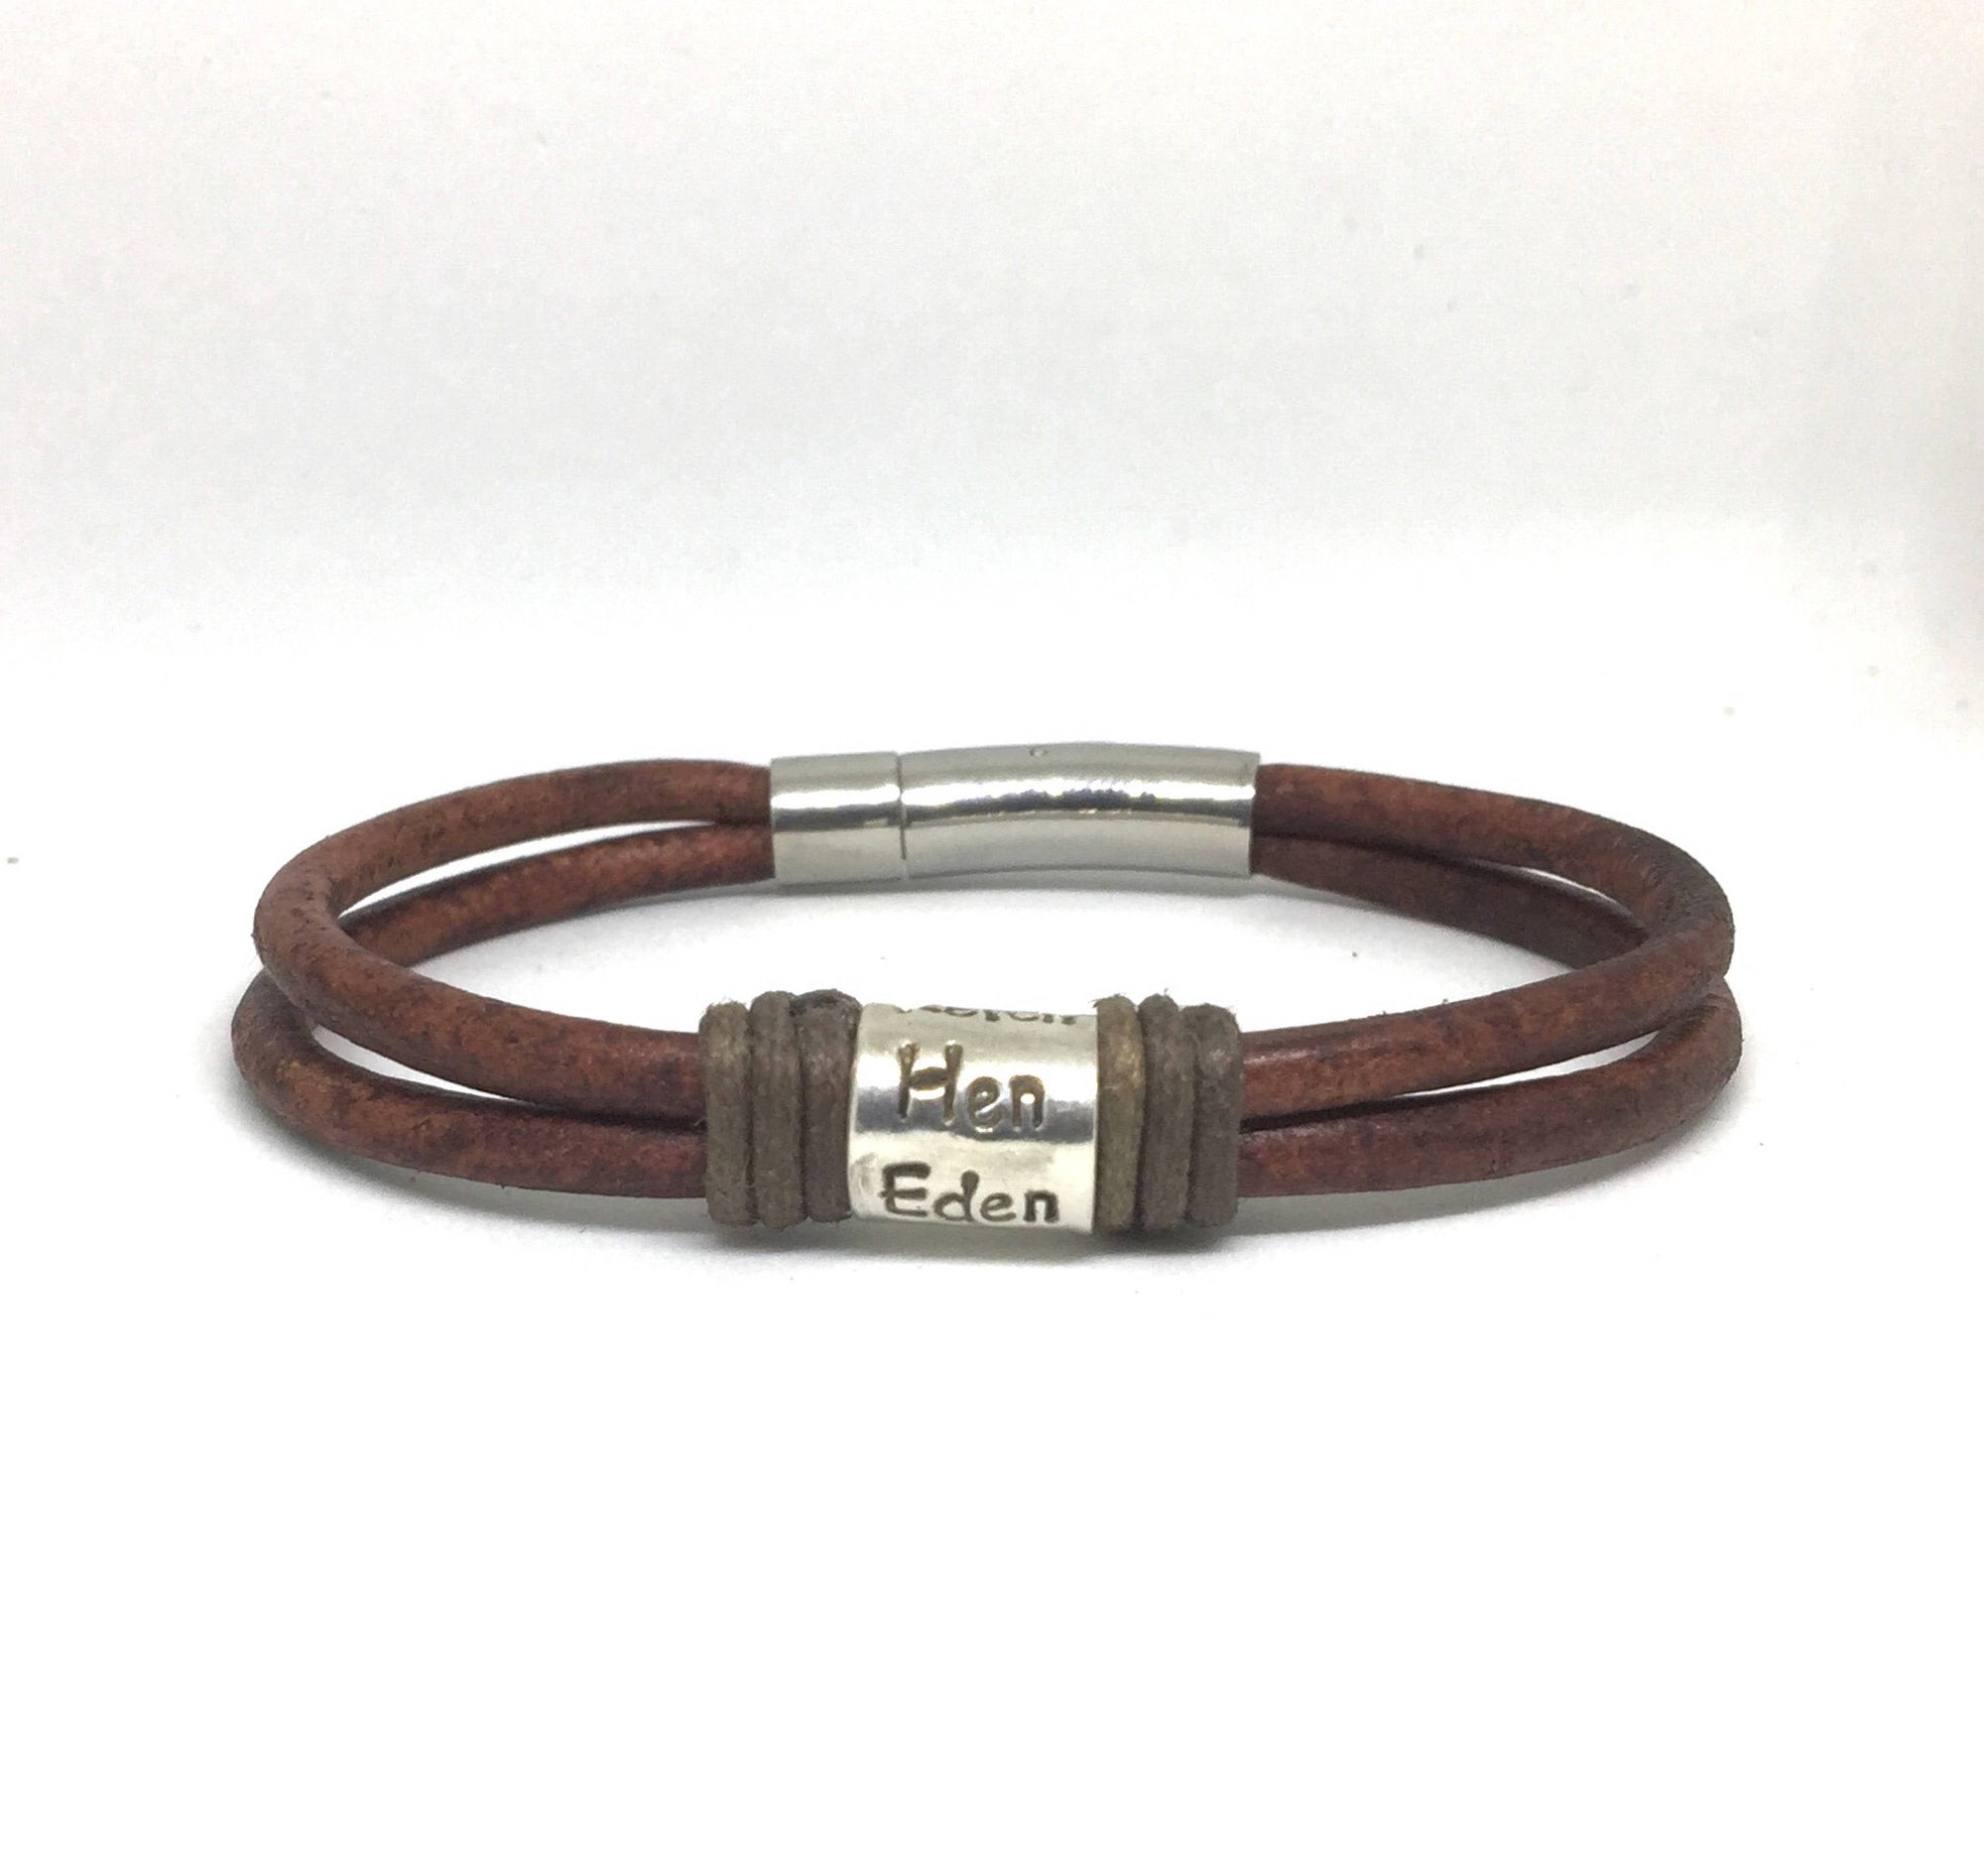 Single Wrap Leather Bracelet, Unisex Gift, Mens Leather Wrap Bracelet, Bracelet Homme, Leather Bracelet Engraved, 30th Birthday Gift Jewelry